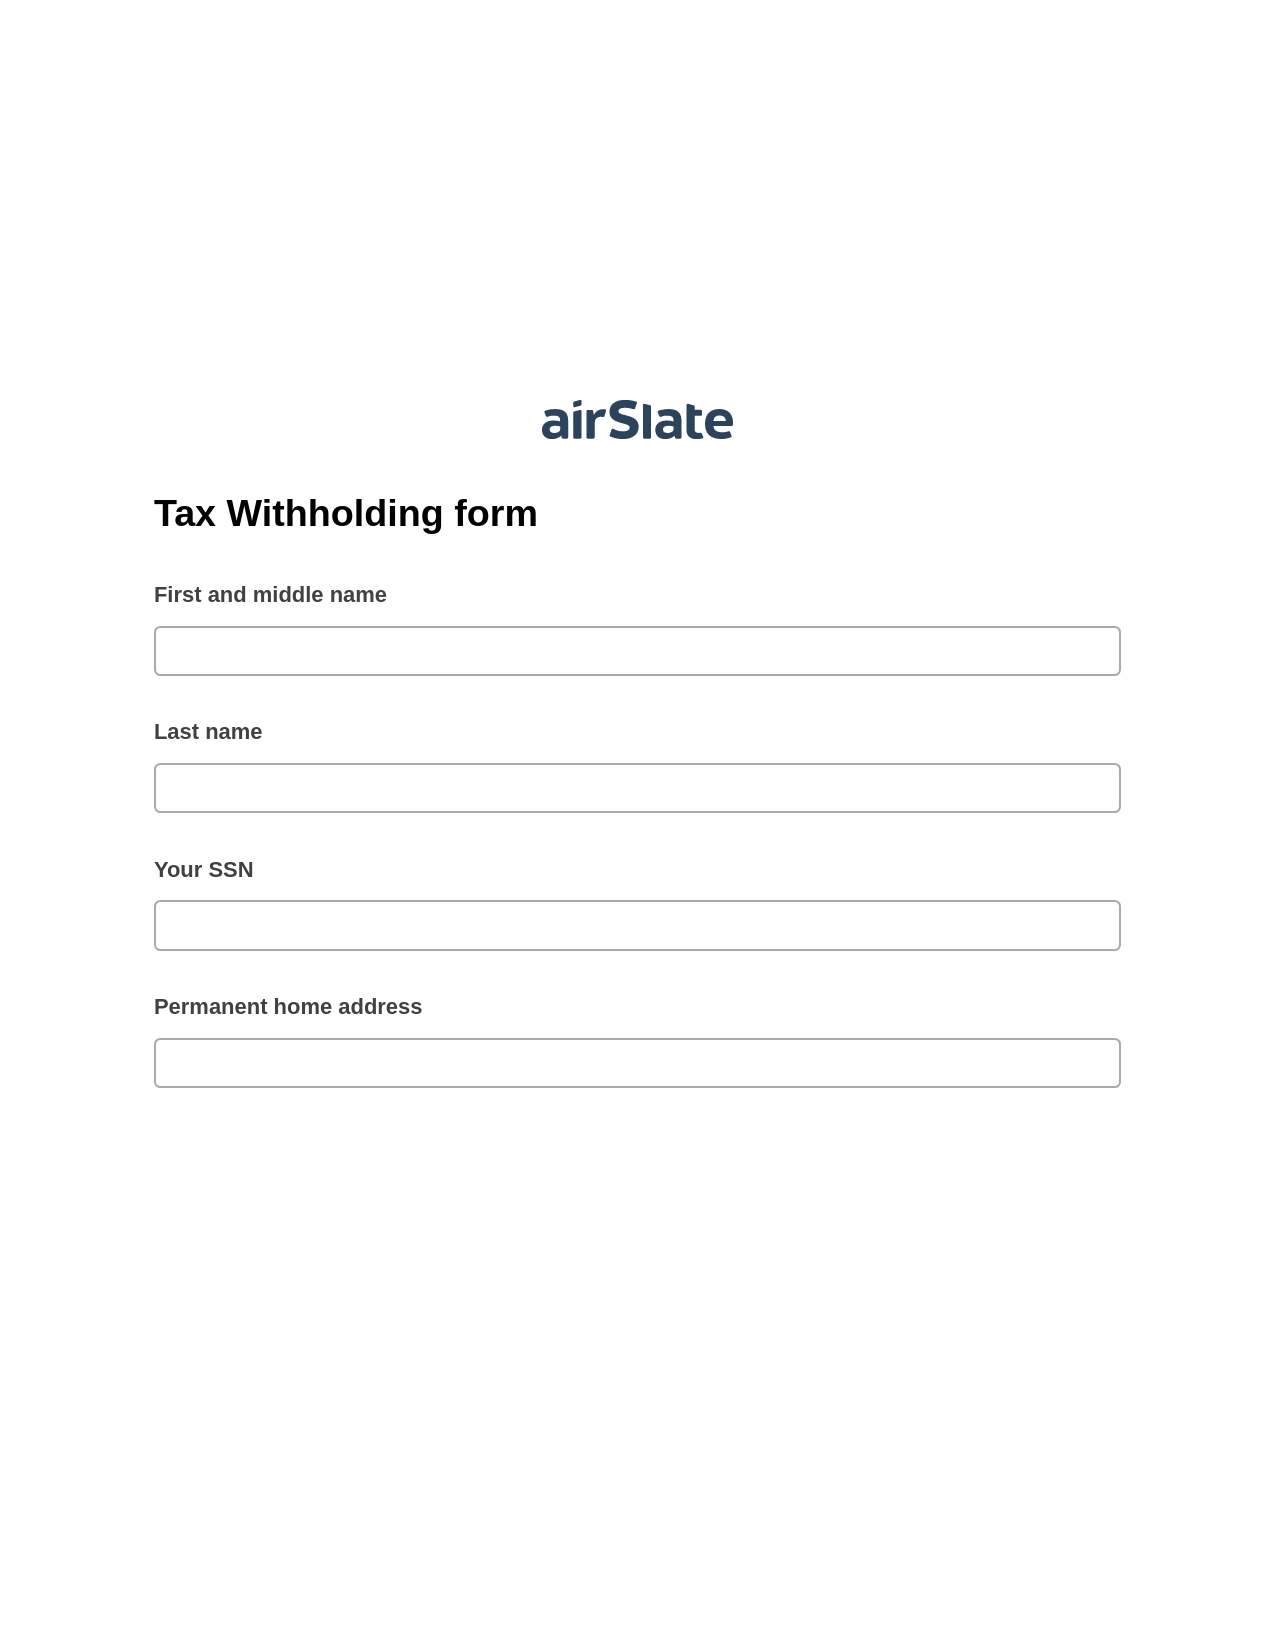 Multirole Tax Withholding form Pre-fill from Salesforce Records via SOQL Bot, Lock the Slate Bot, Box Bot